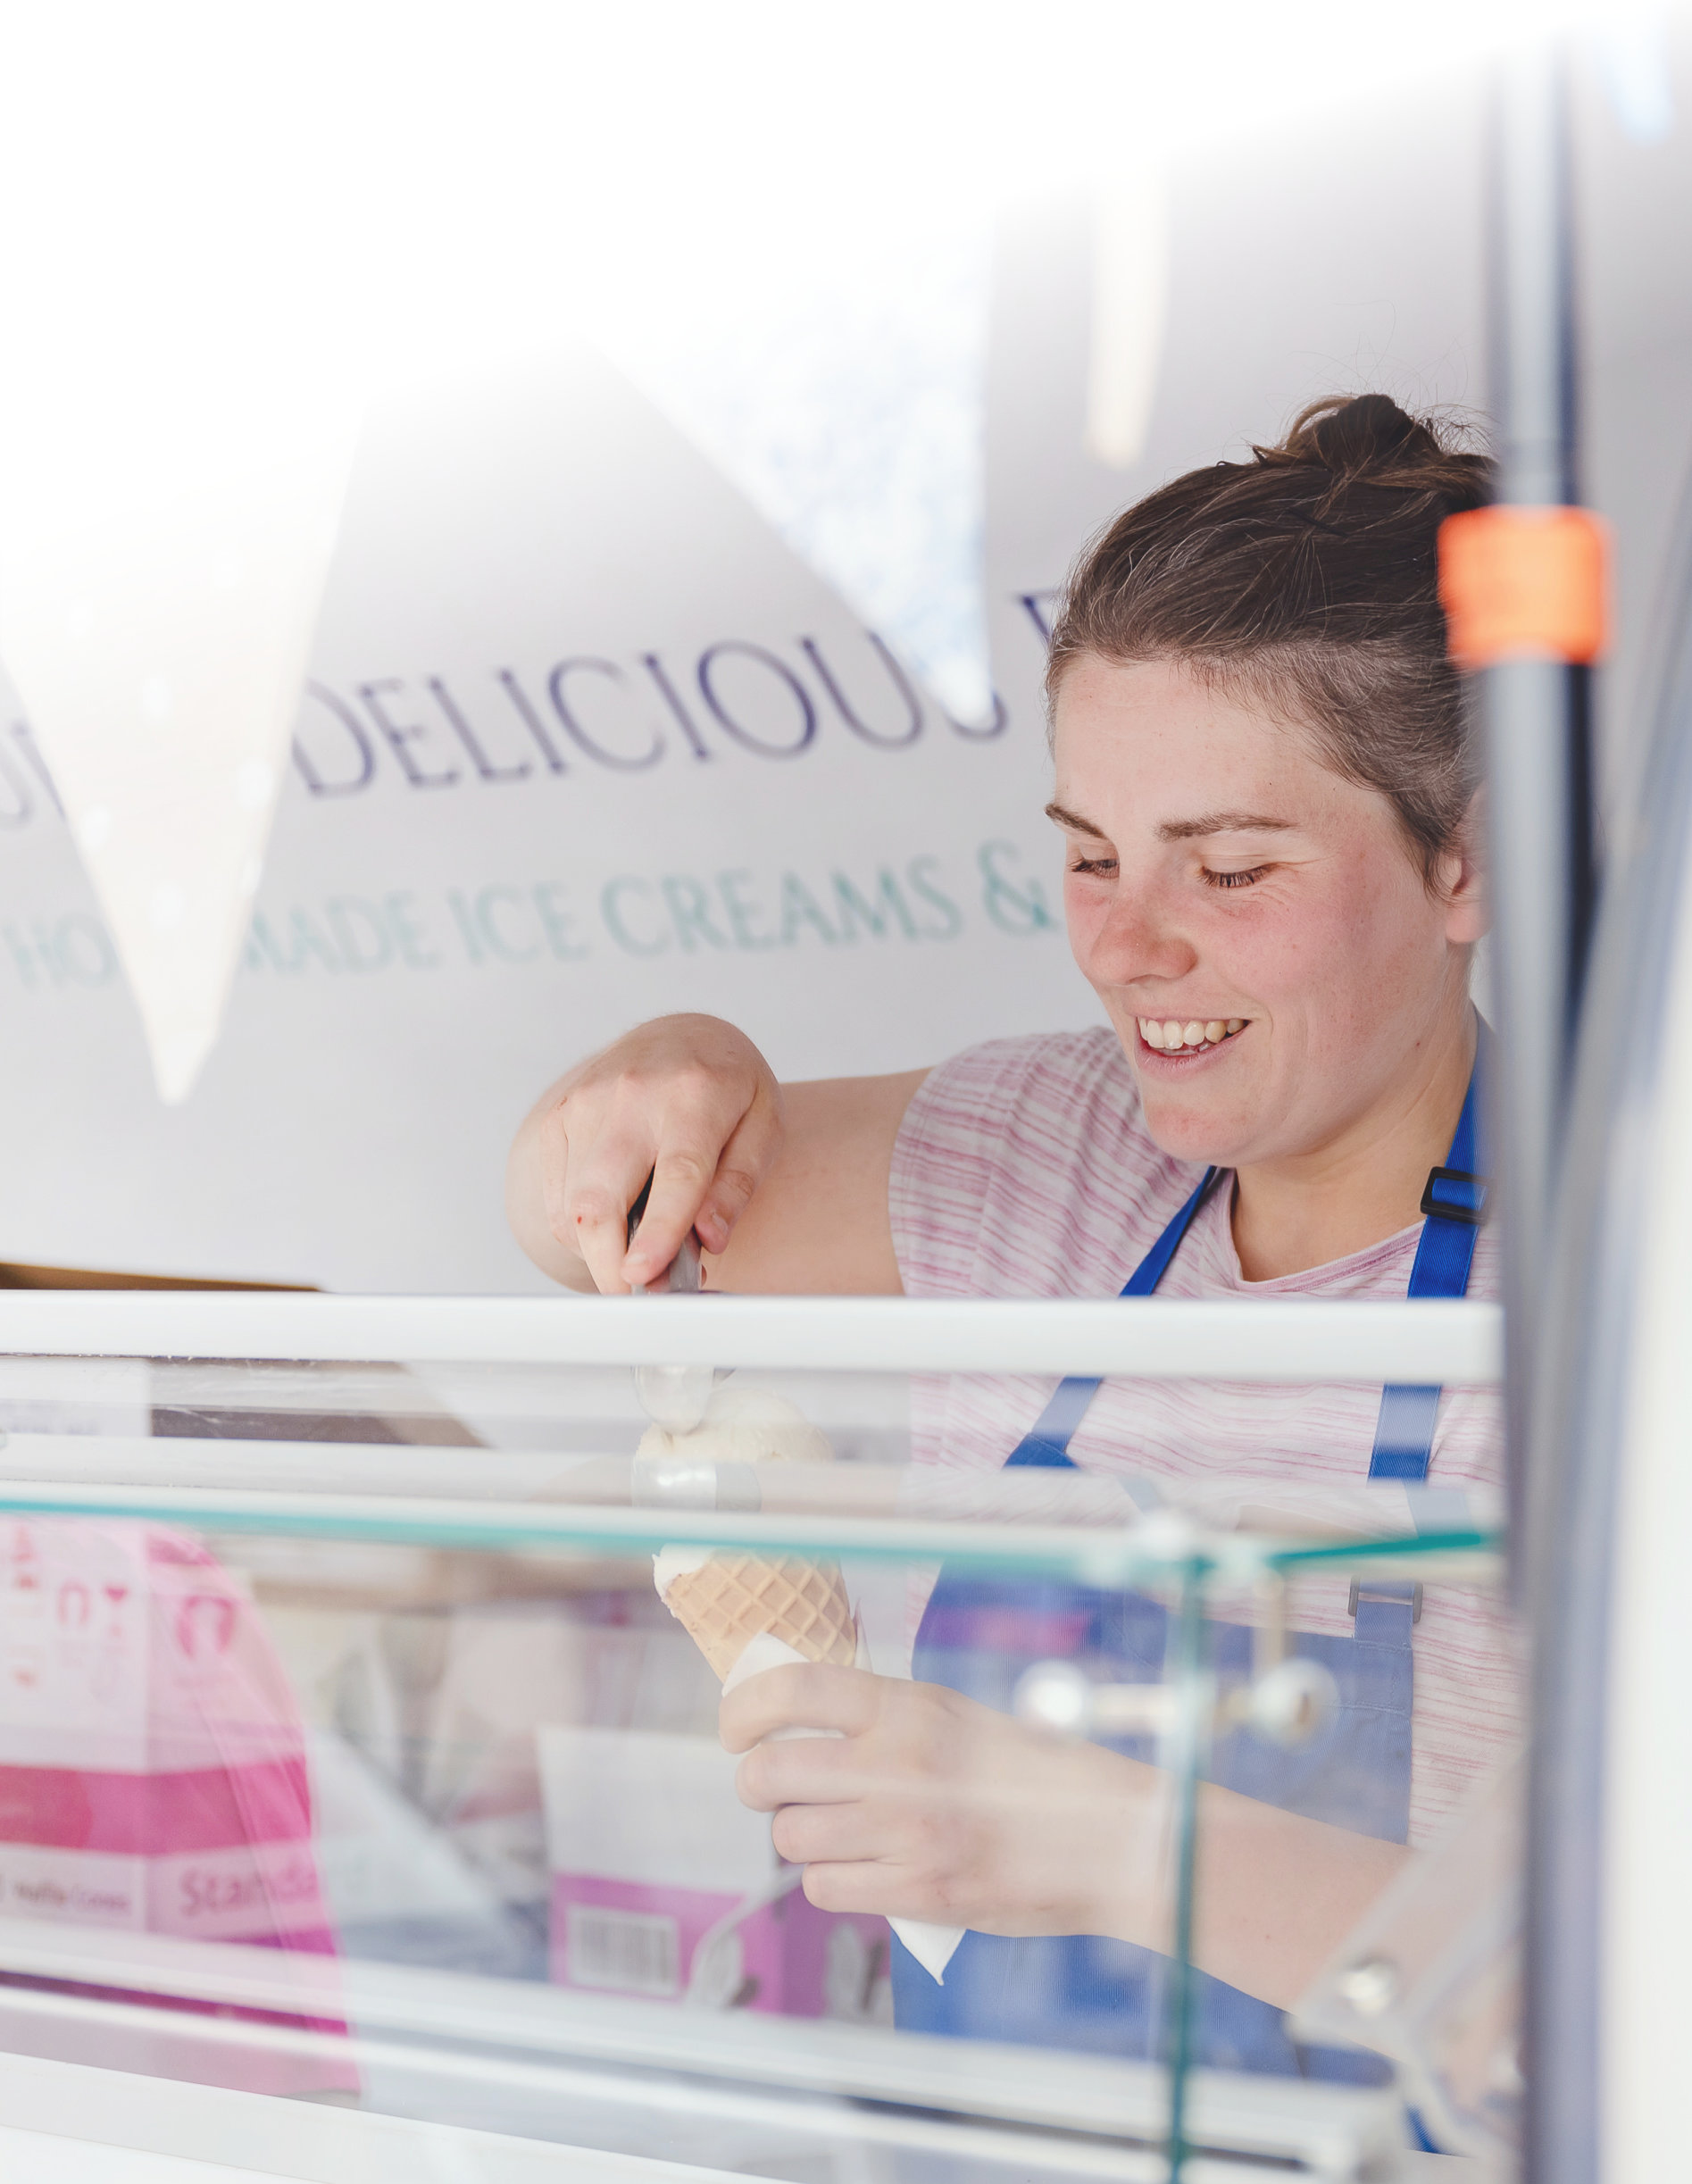 A woman scooping ice cream